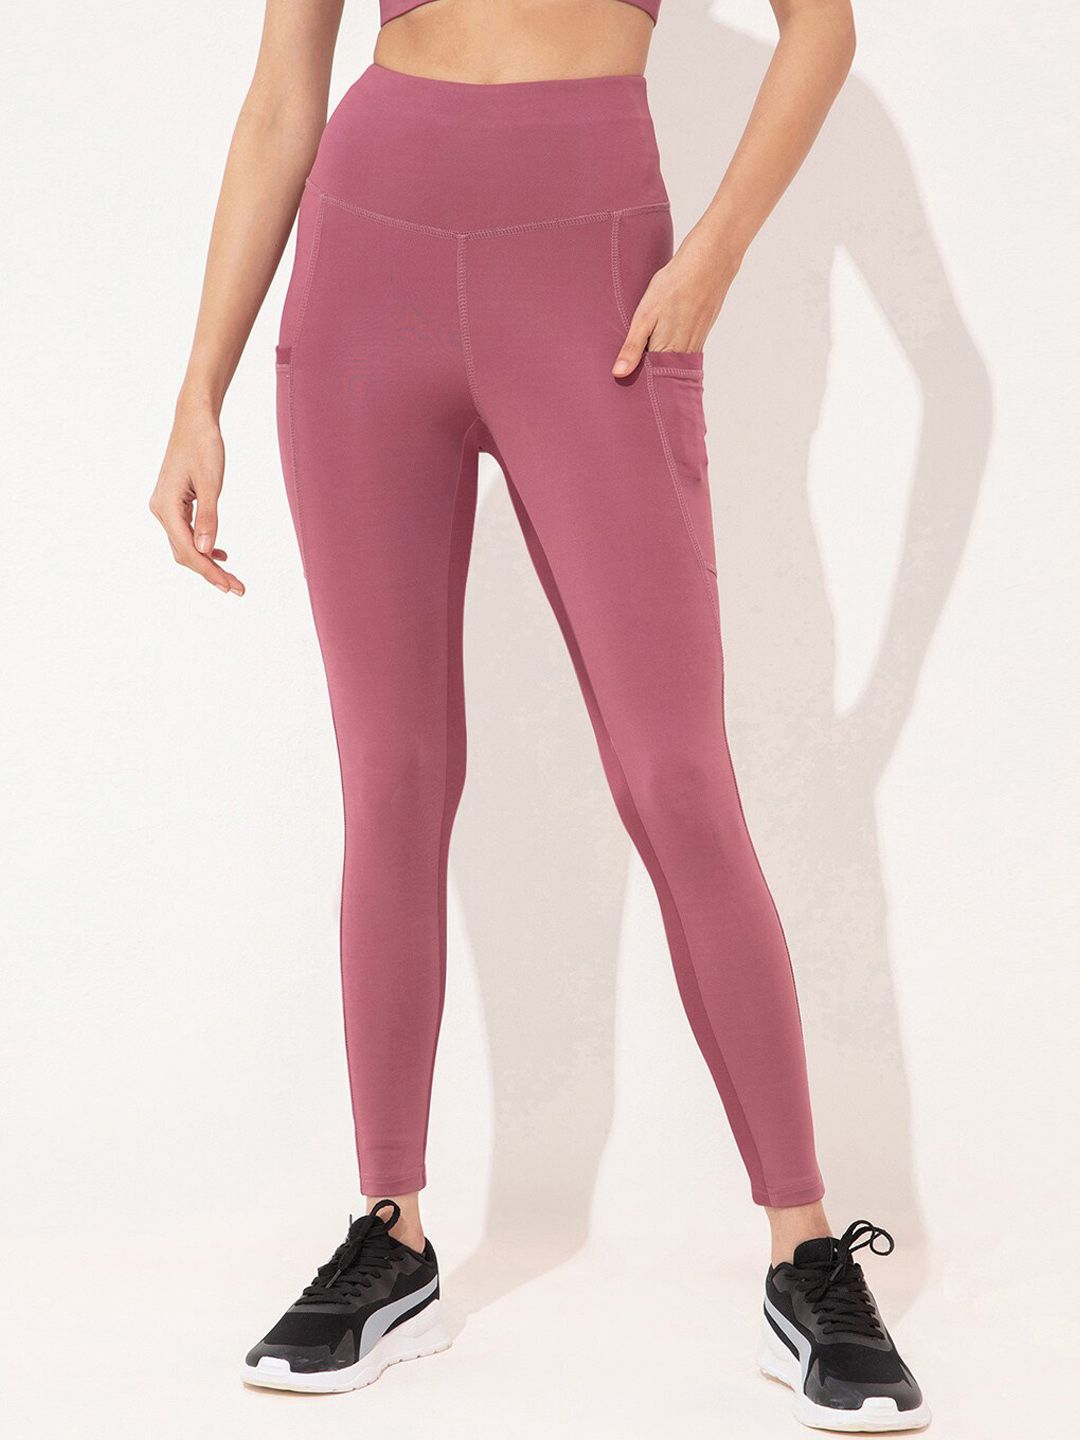 KICA Women Pink Solid Ankle-Length Tights Price in India